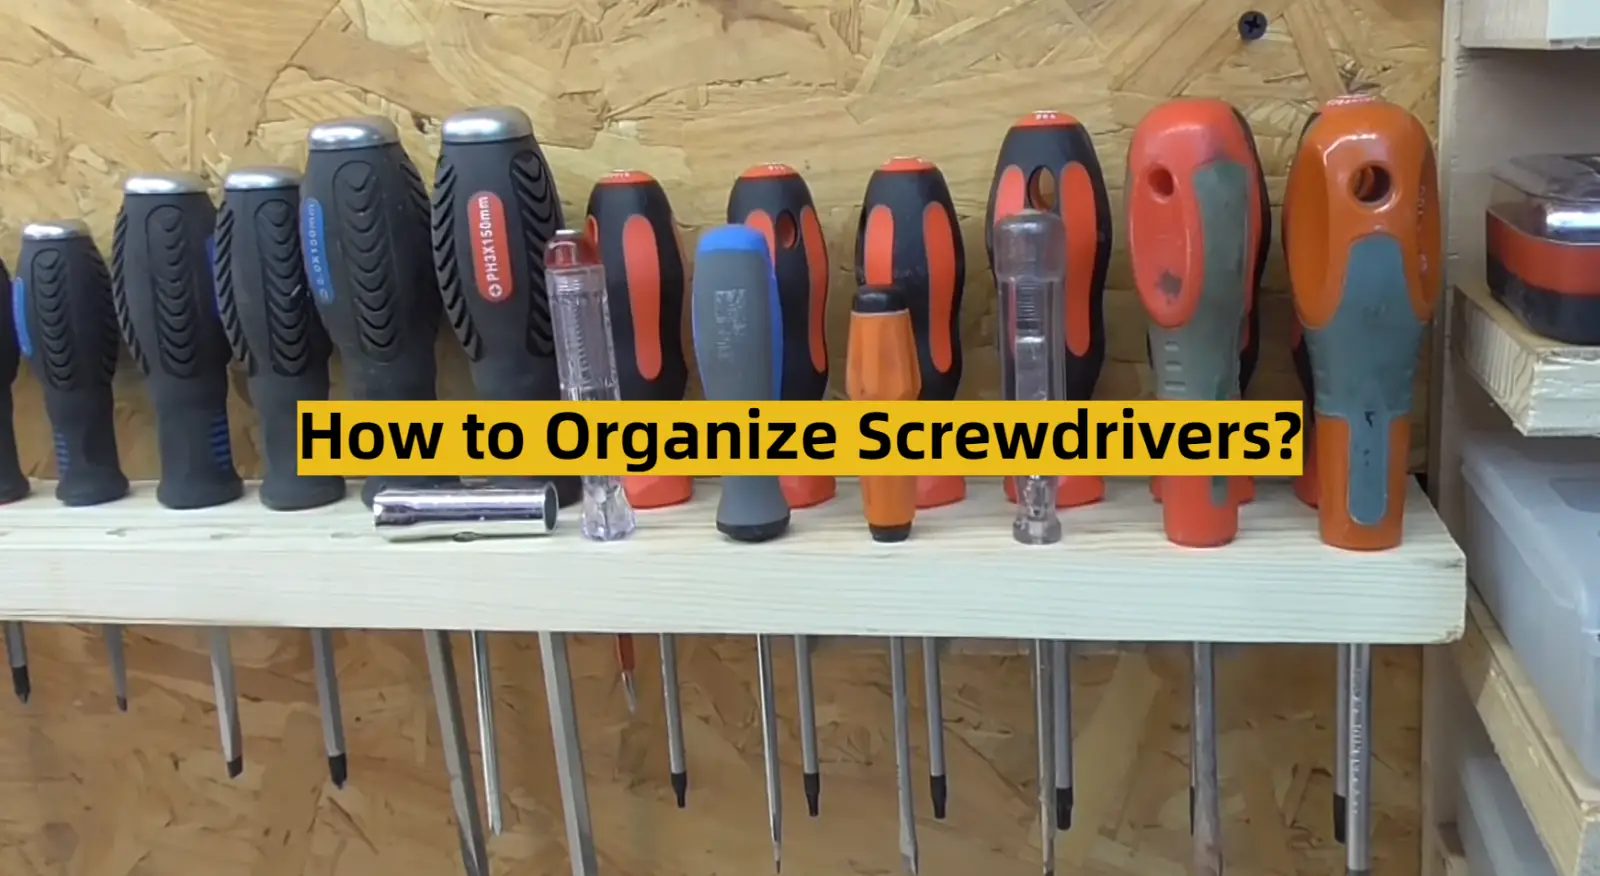 How to Organize Screwdrivers?